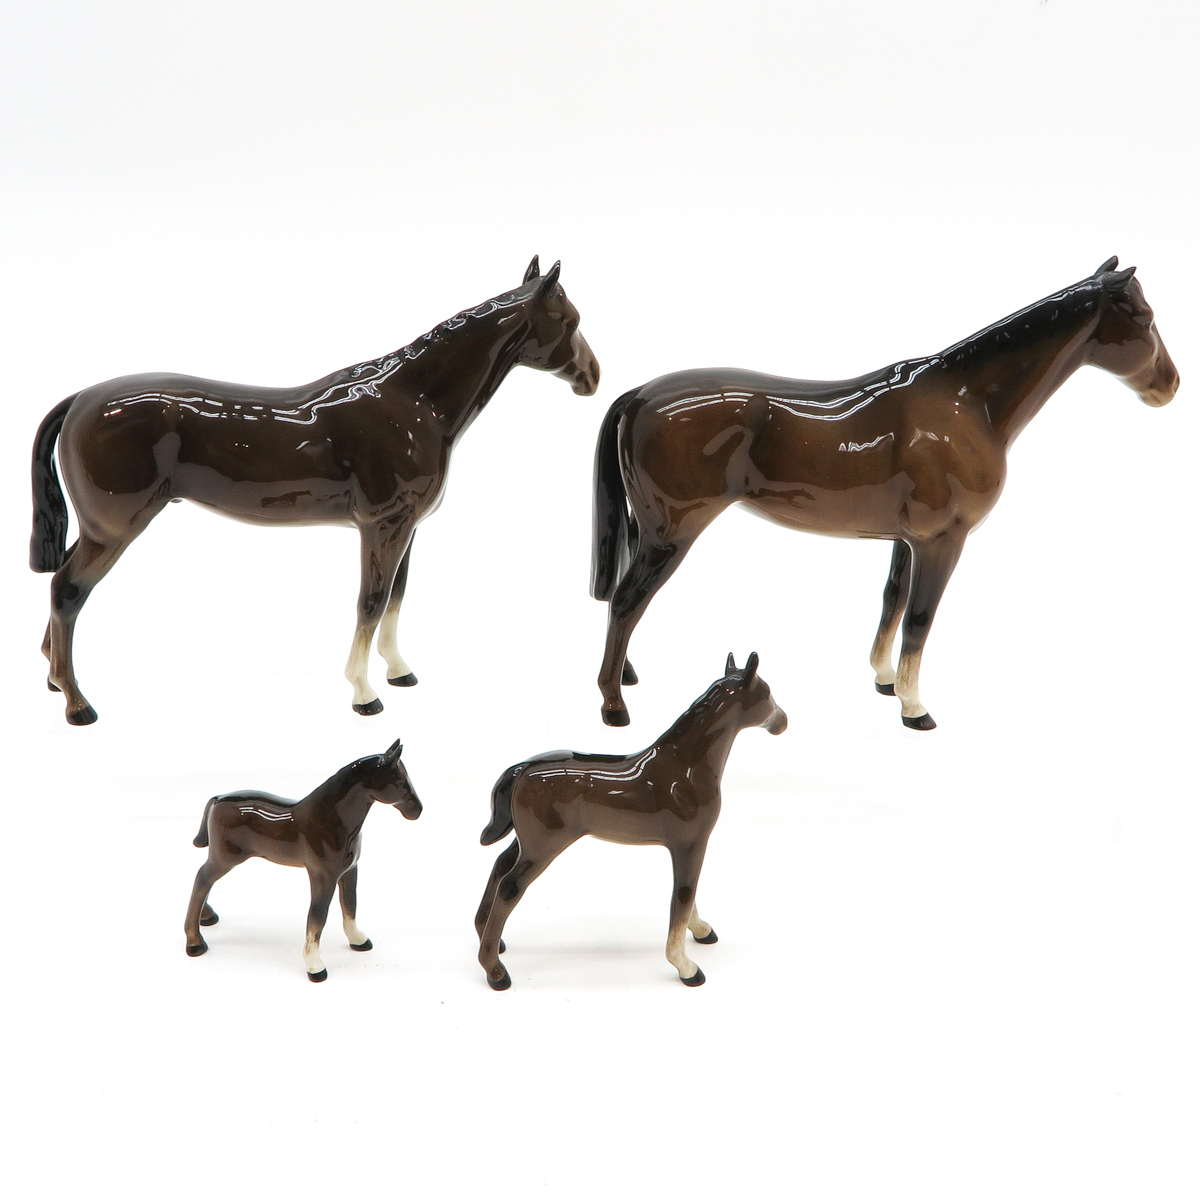 Lot of 4 Porcelain Beswick and Royal Doulton Horses - Image 2 of 3